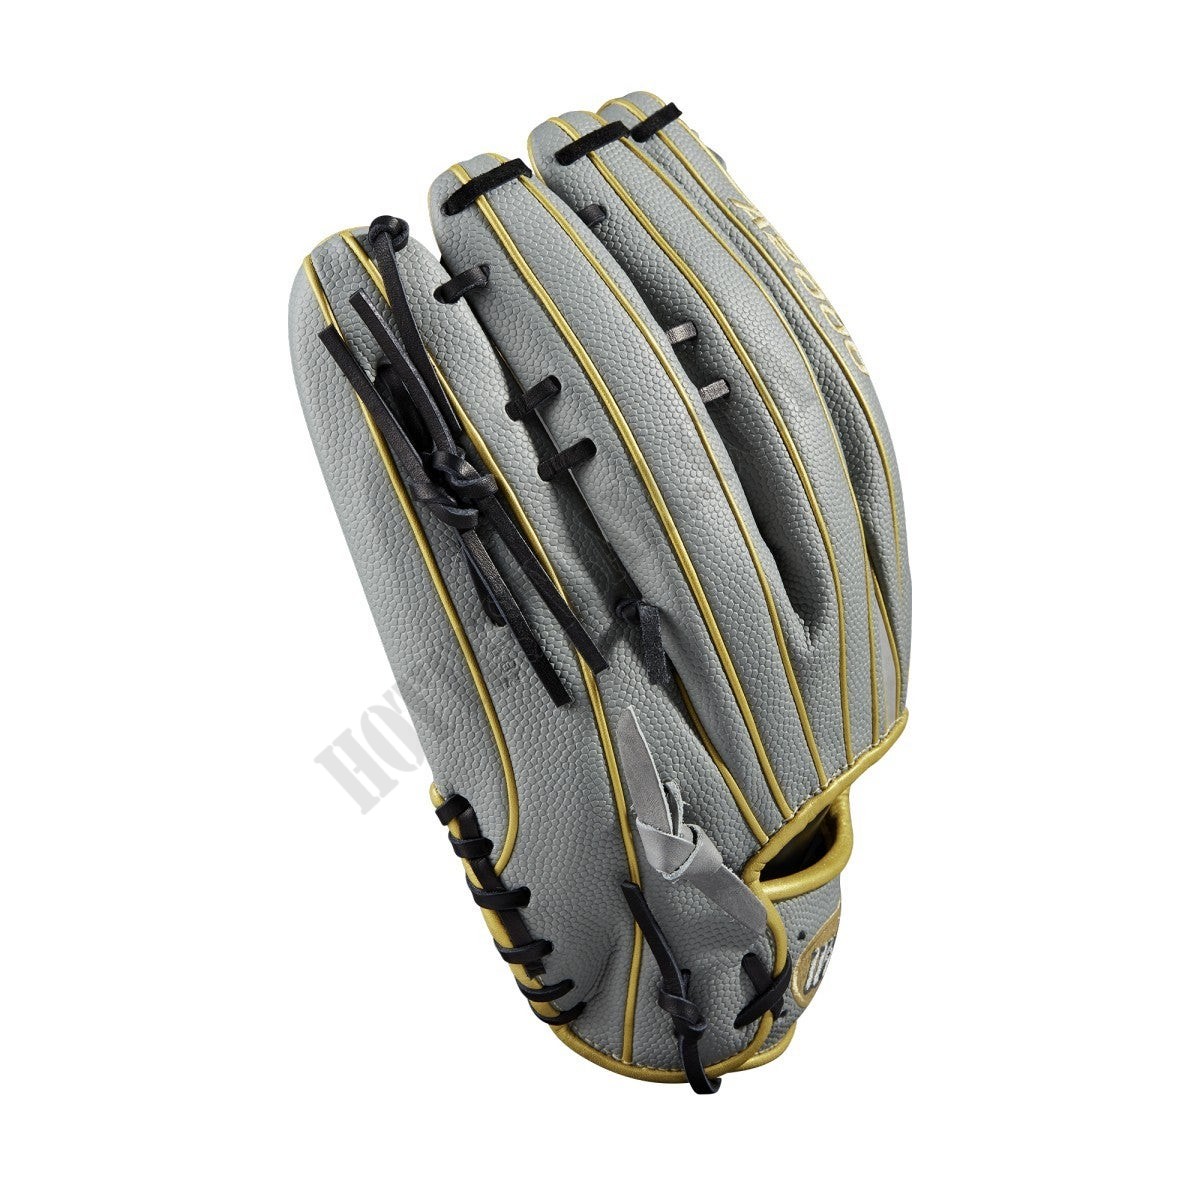 2020 A2000 SP13 13" Slowpitch Softball Glove ● Wilson Promotions - -4